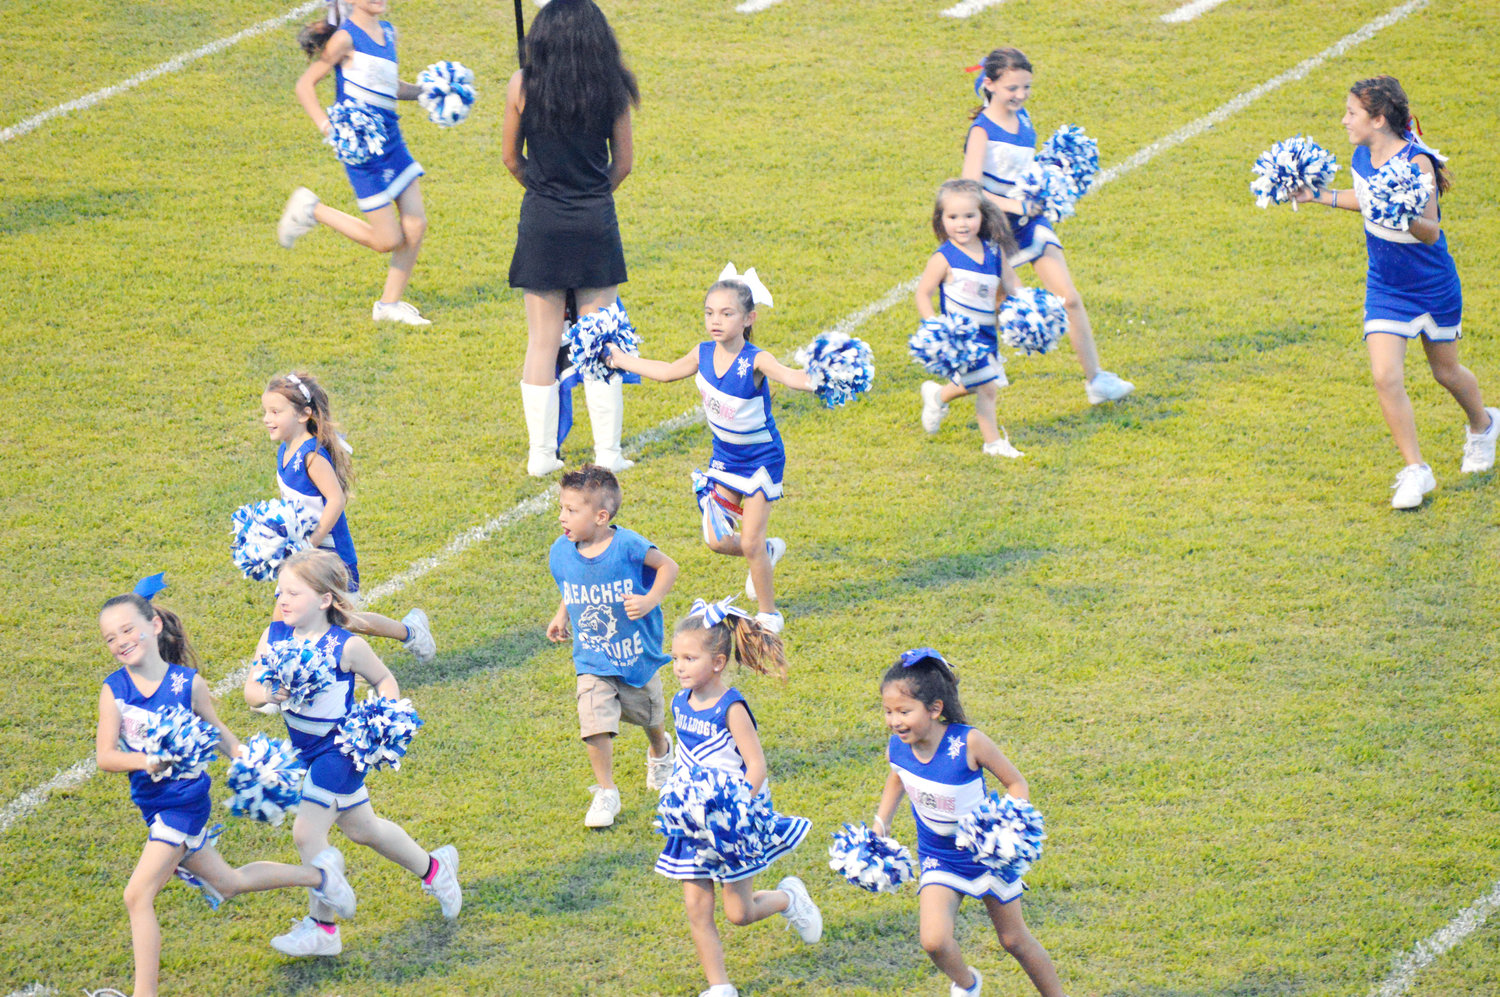 This young Bulldog had a great time among the peewee cheerleaders as they ran on the field homecoming night.